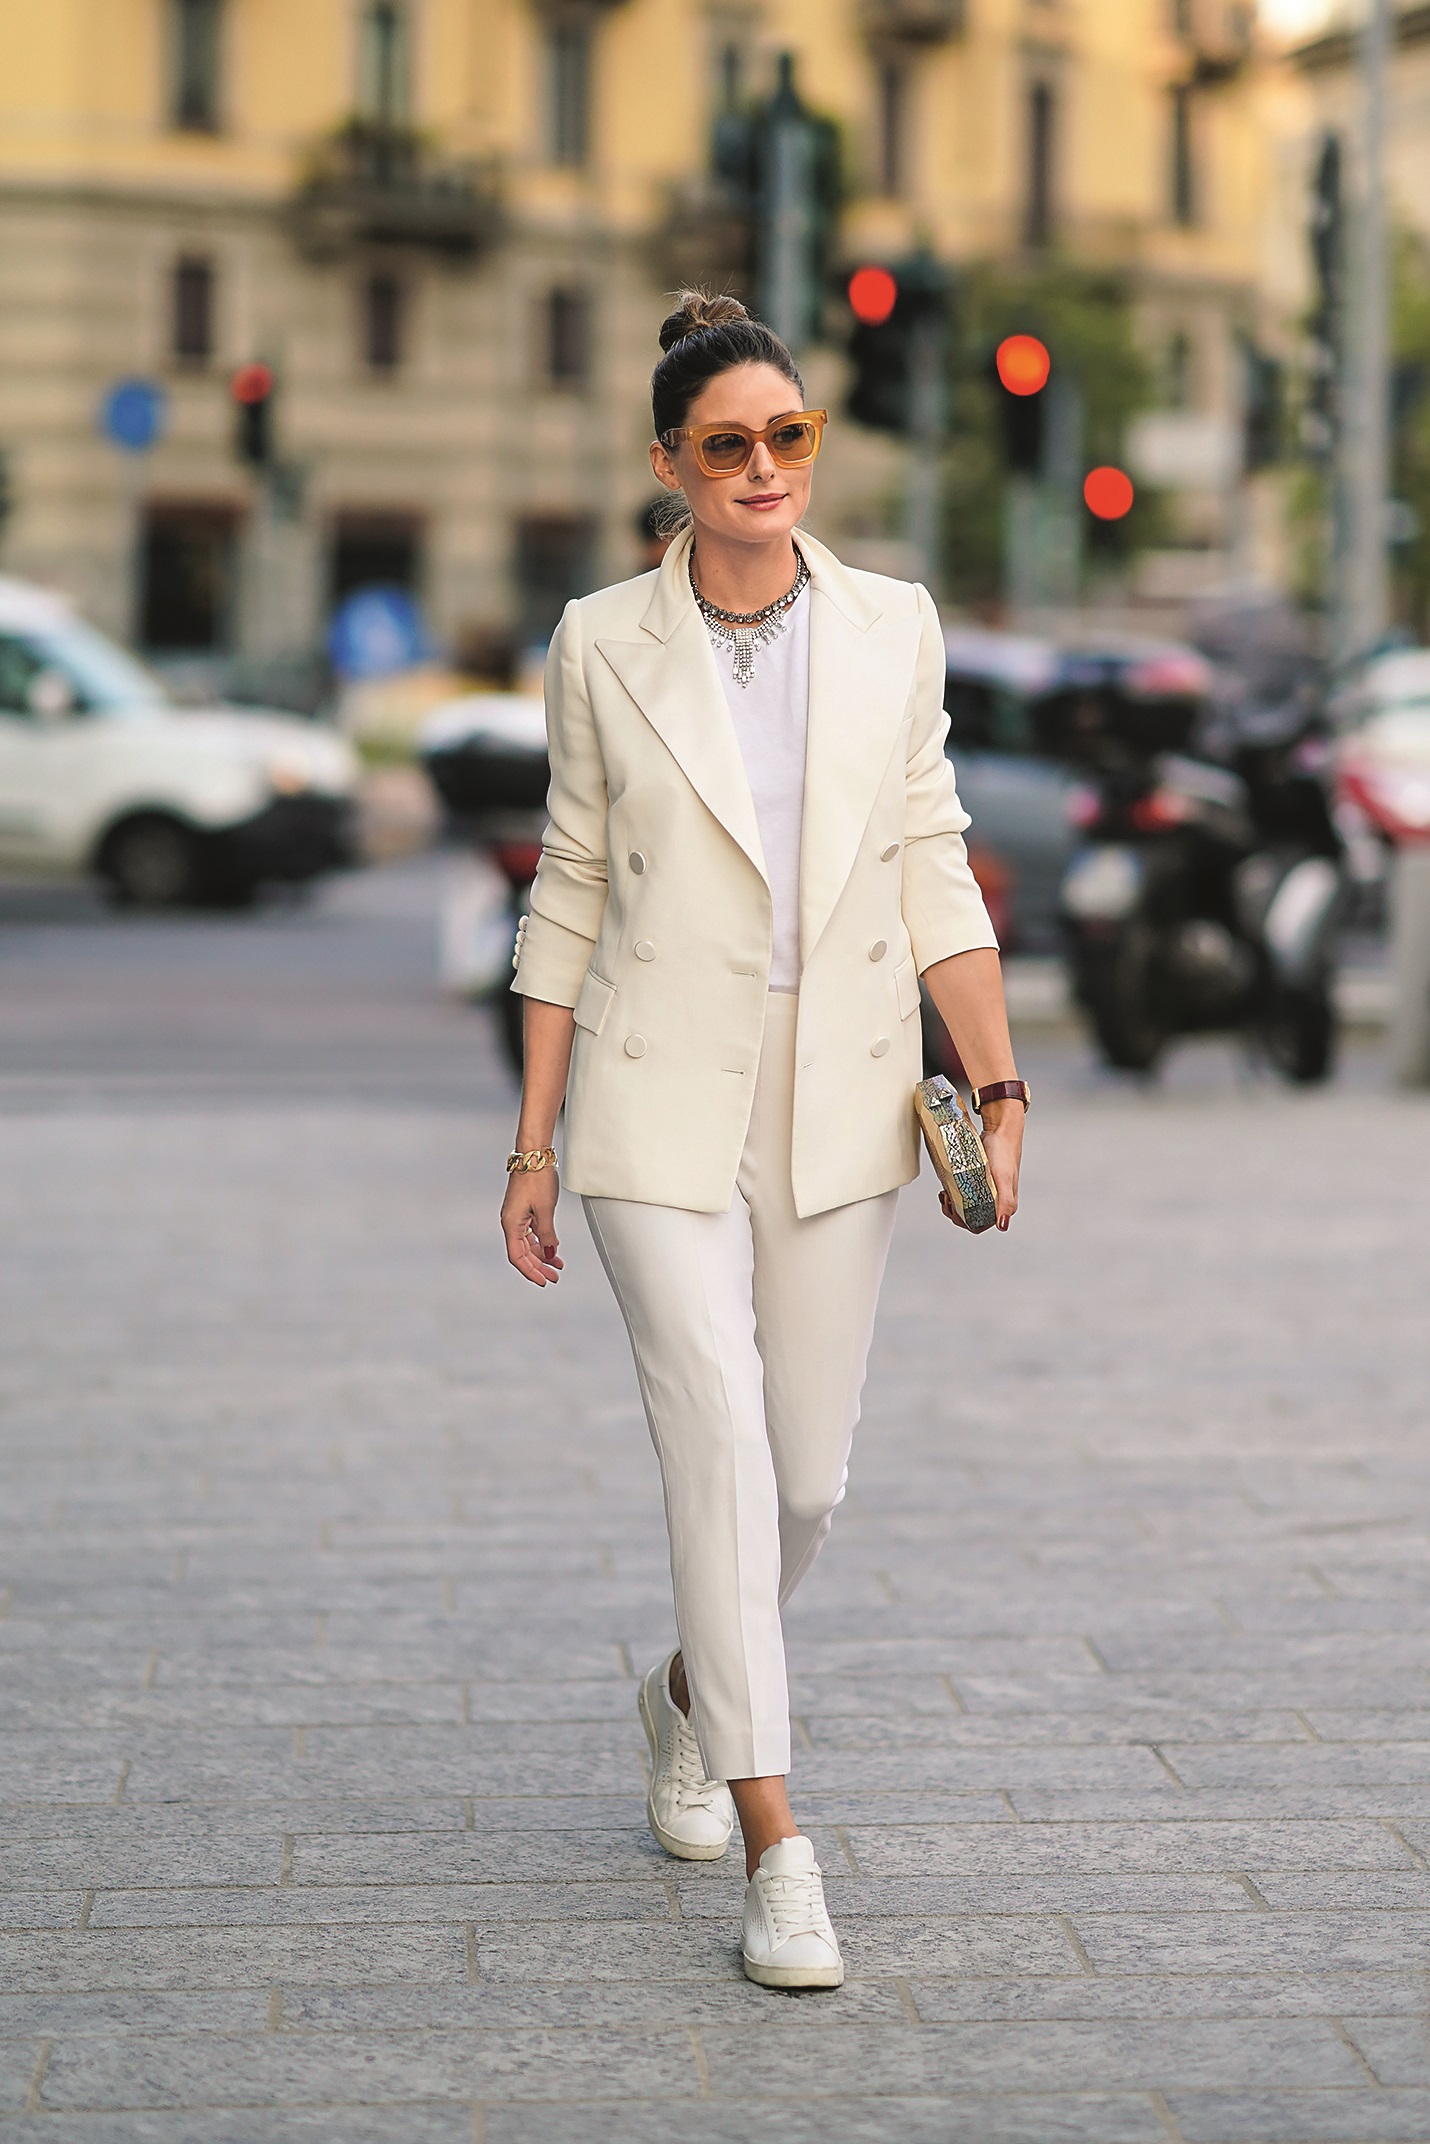 MILAN, ITALY - SEPTEMBER 18: Olivia Palermo wears brown sunglasses, a white blazer jacket, a necklace, a white t-shirt, cropped pants, sneakers, a golden clutch, outside the Alberta Ferretti show during Milan Fashion Week Spring/Summer 2020 on September 18, 2019 in Milan, Italy. (Photo by Edward Berthelot/Getty Images)